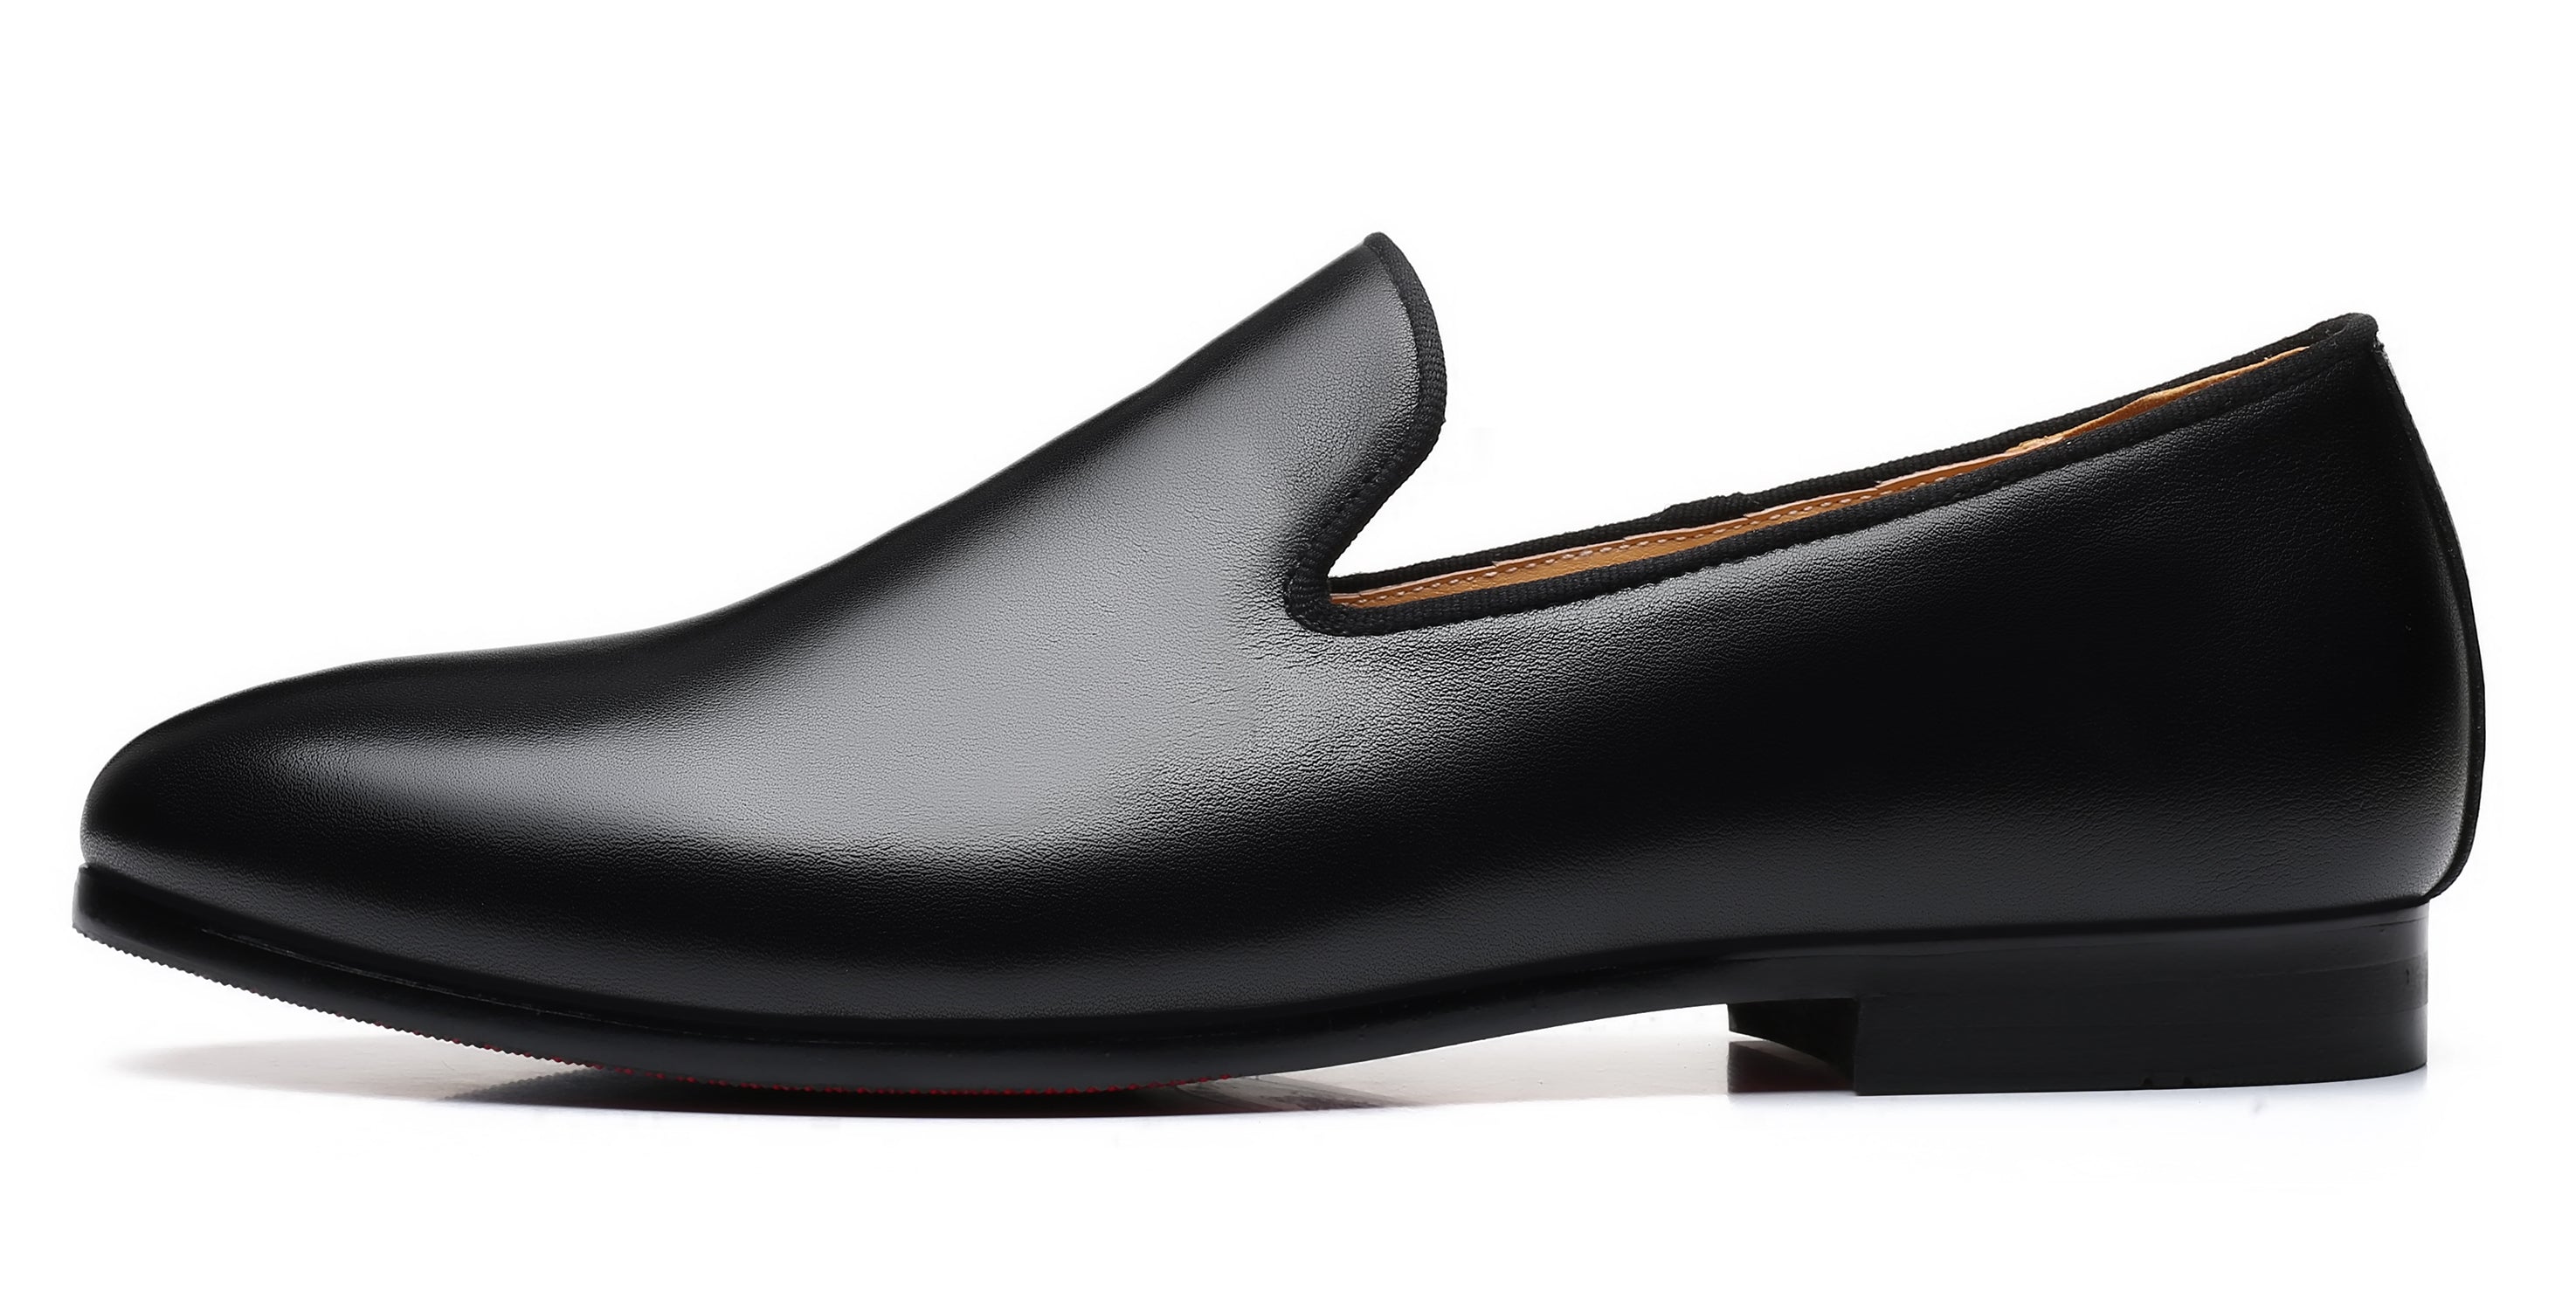 Men's Plain Leather Smoking Loafers